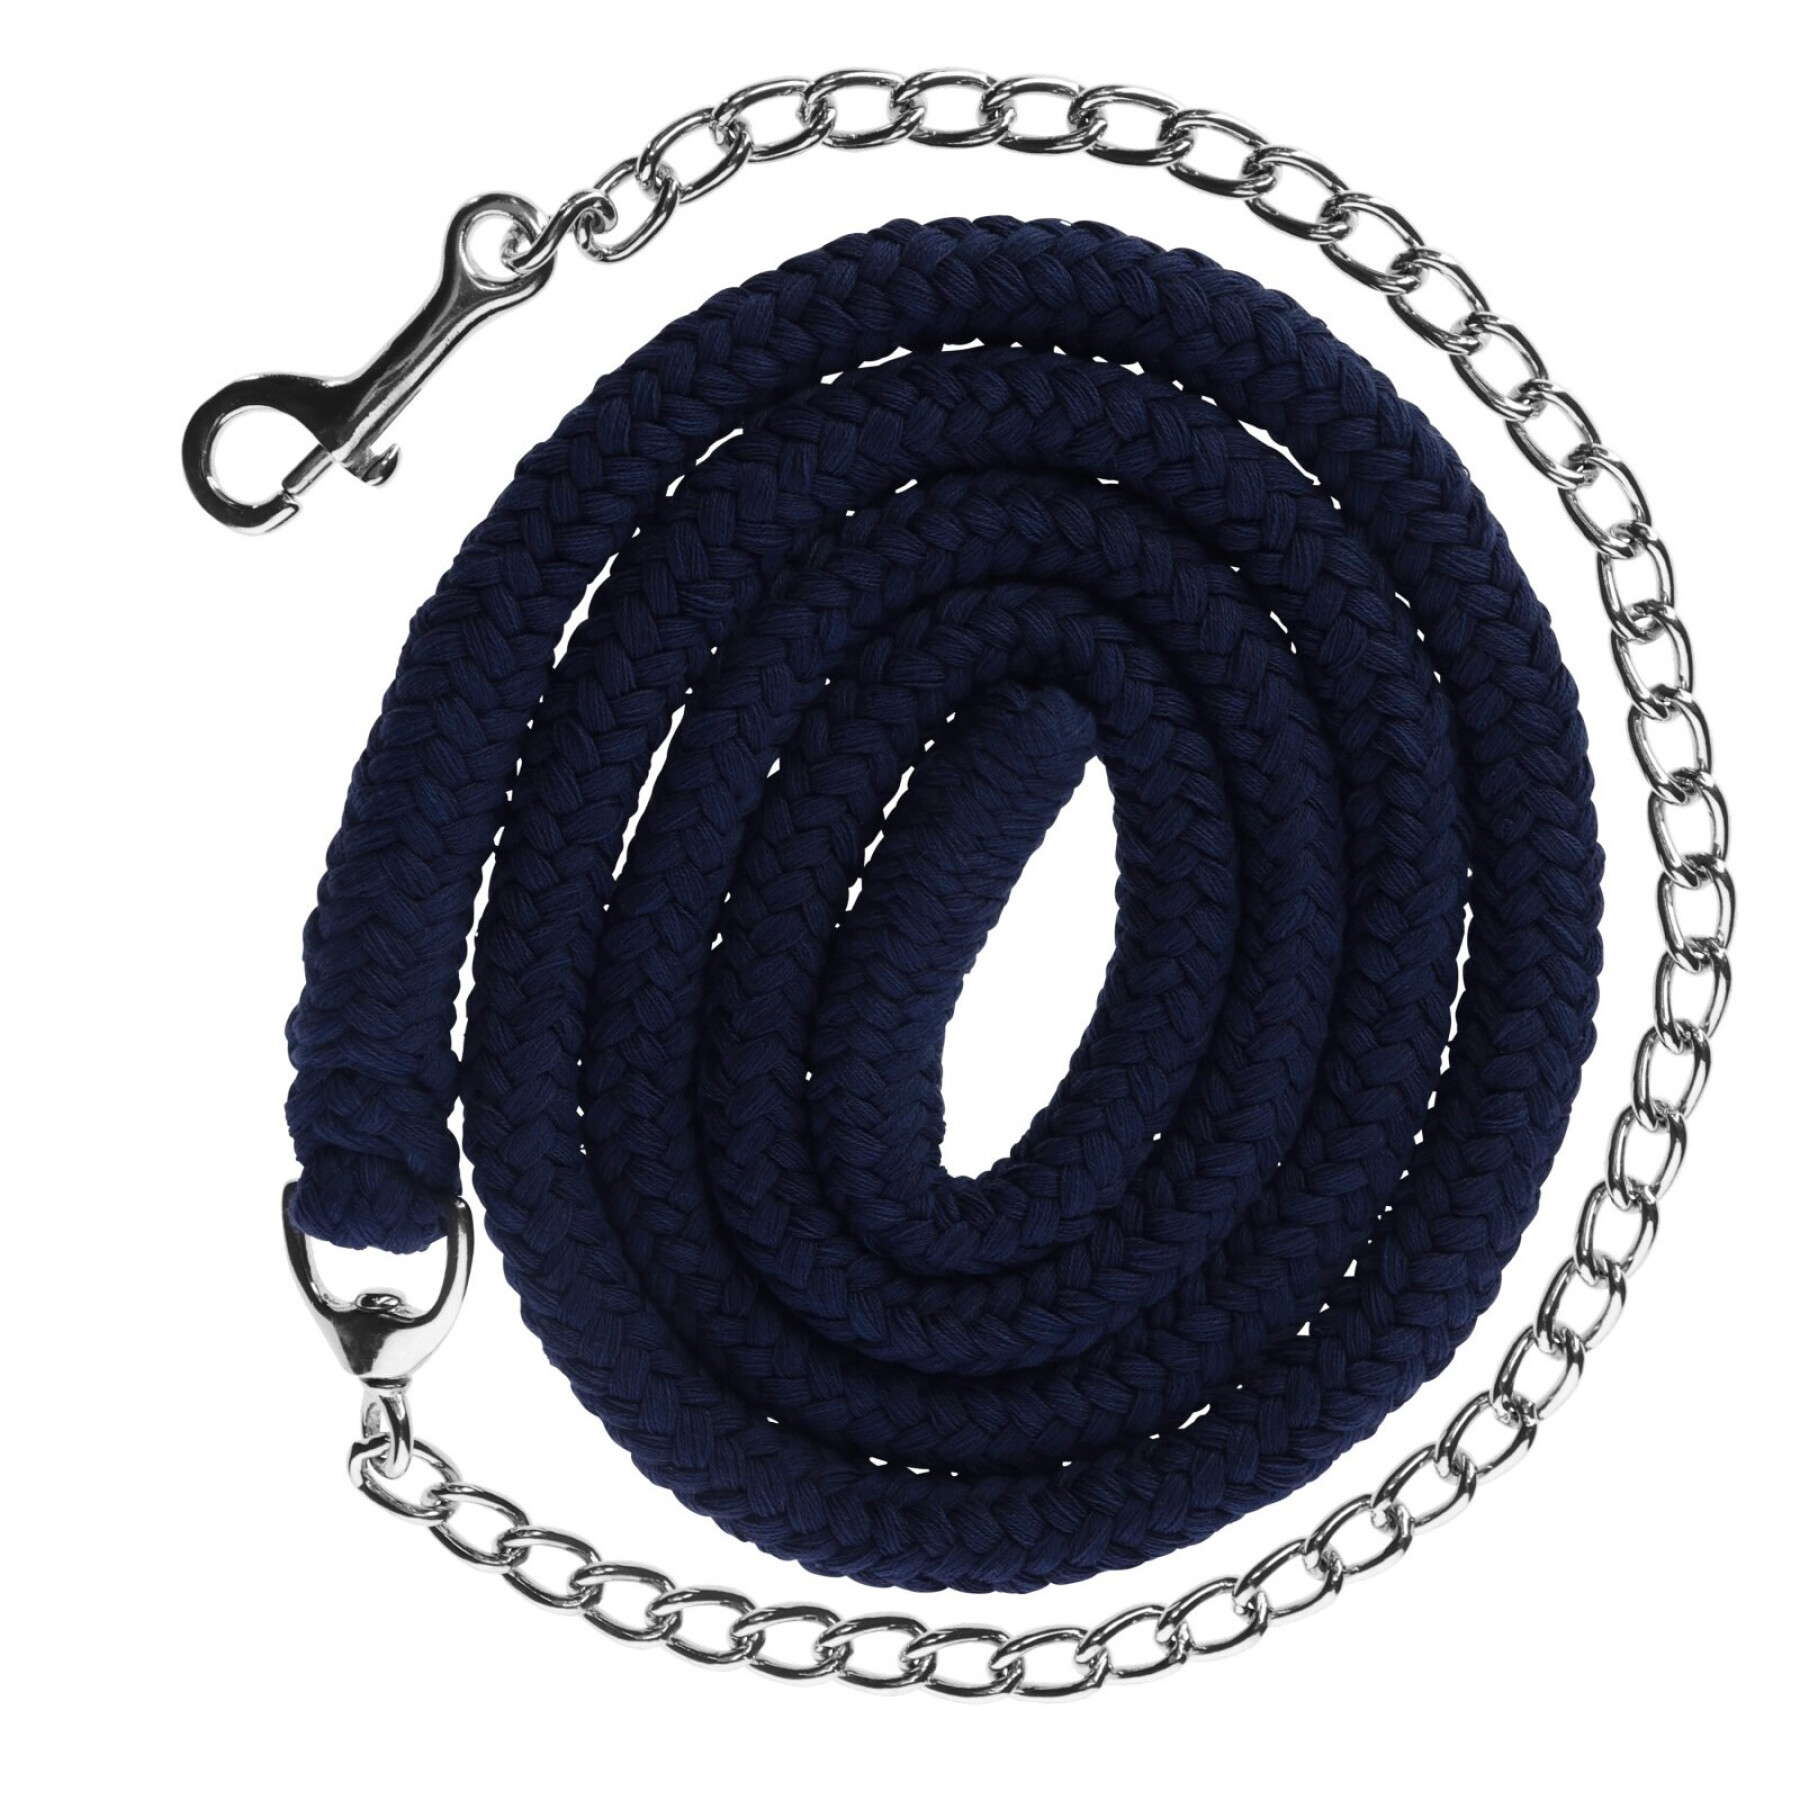 Cotton riding lanyard with chain Covalliero